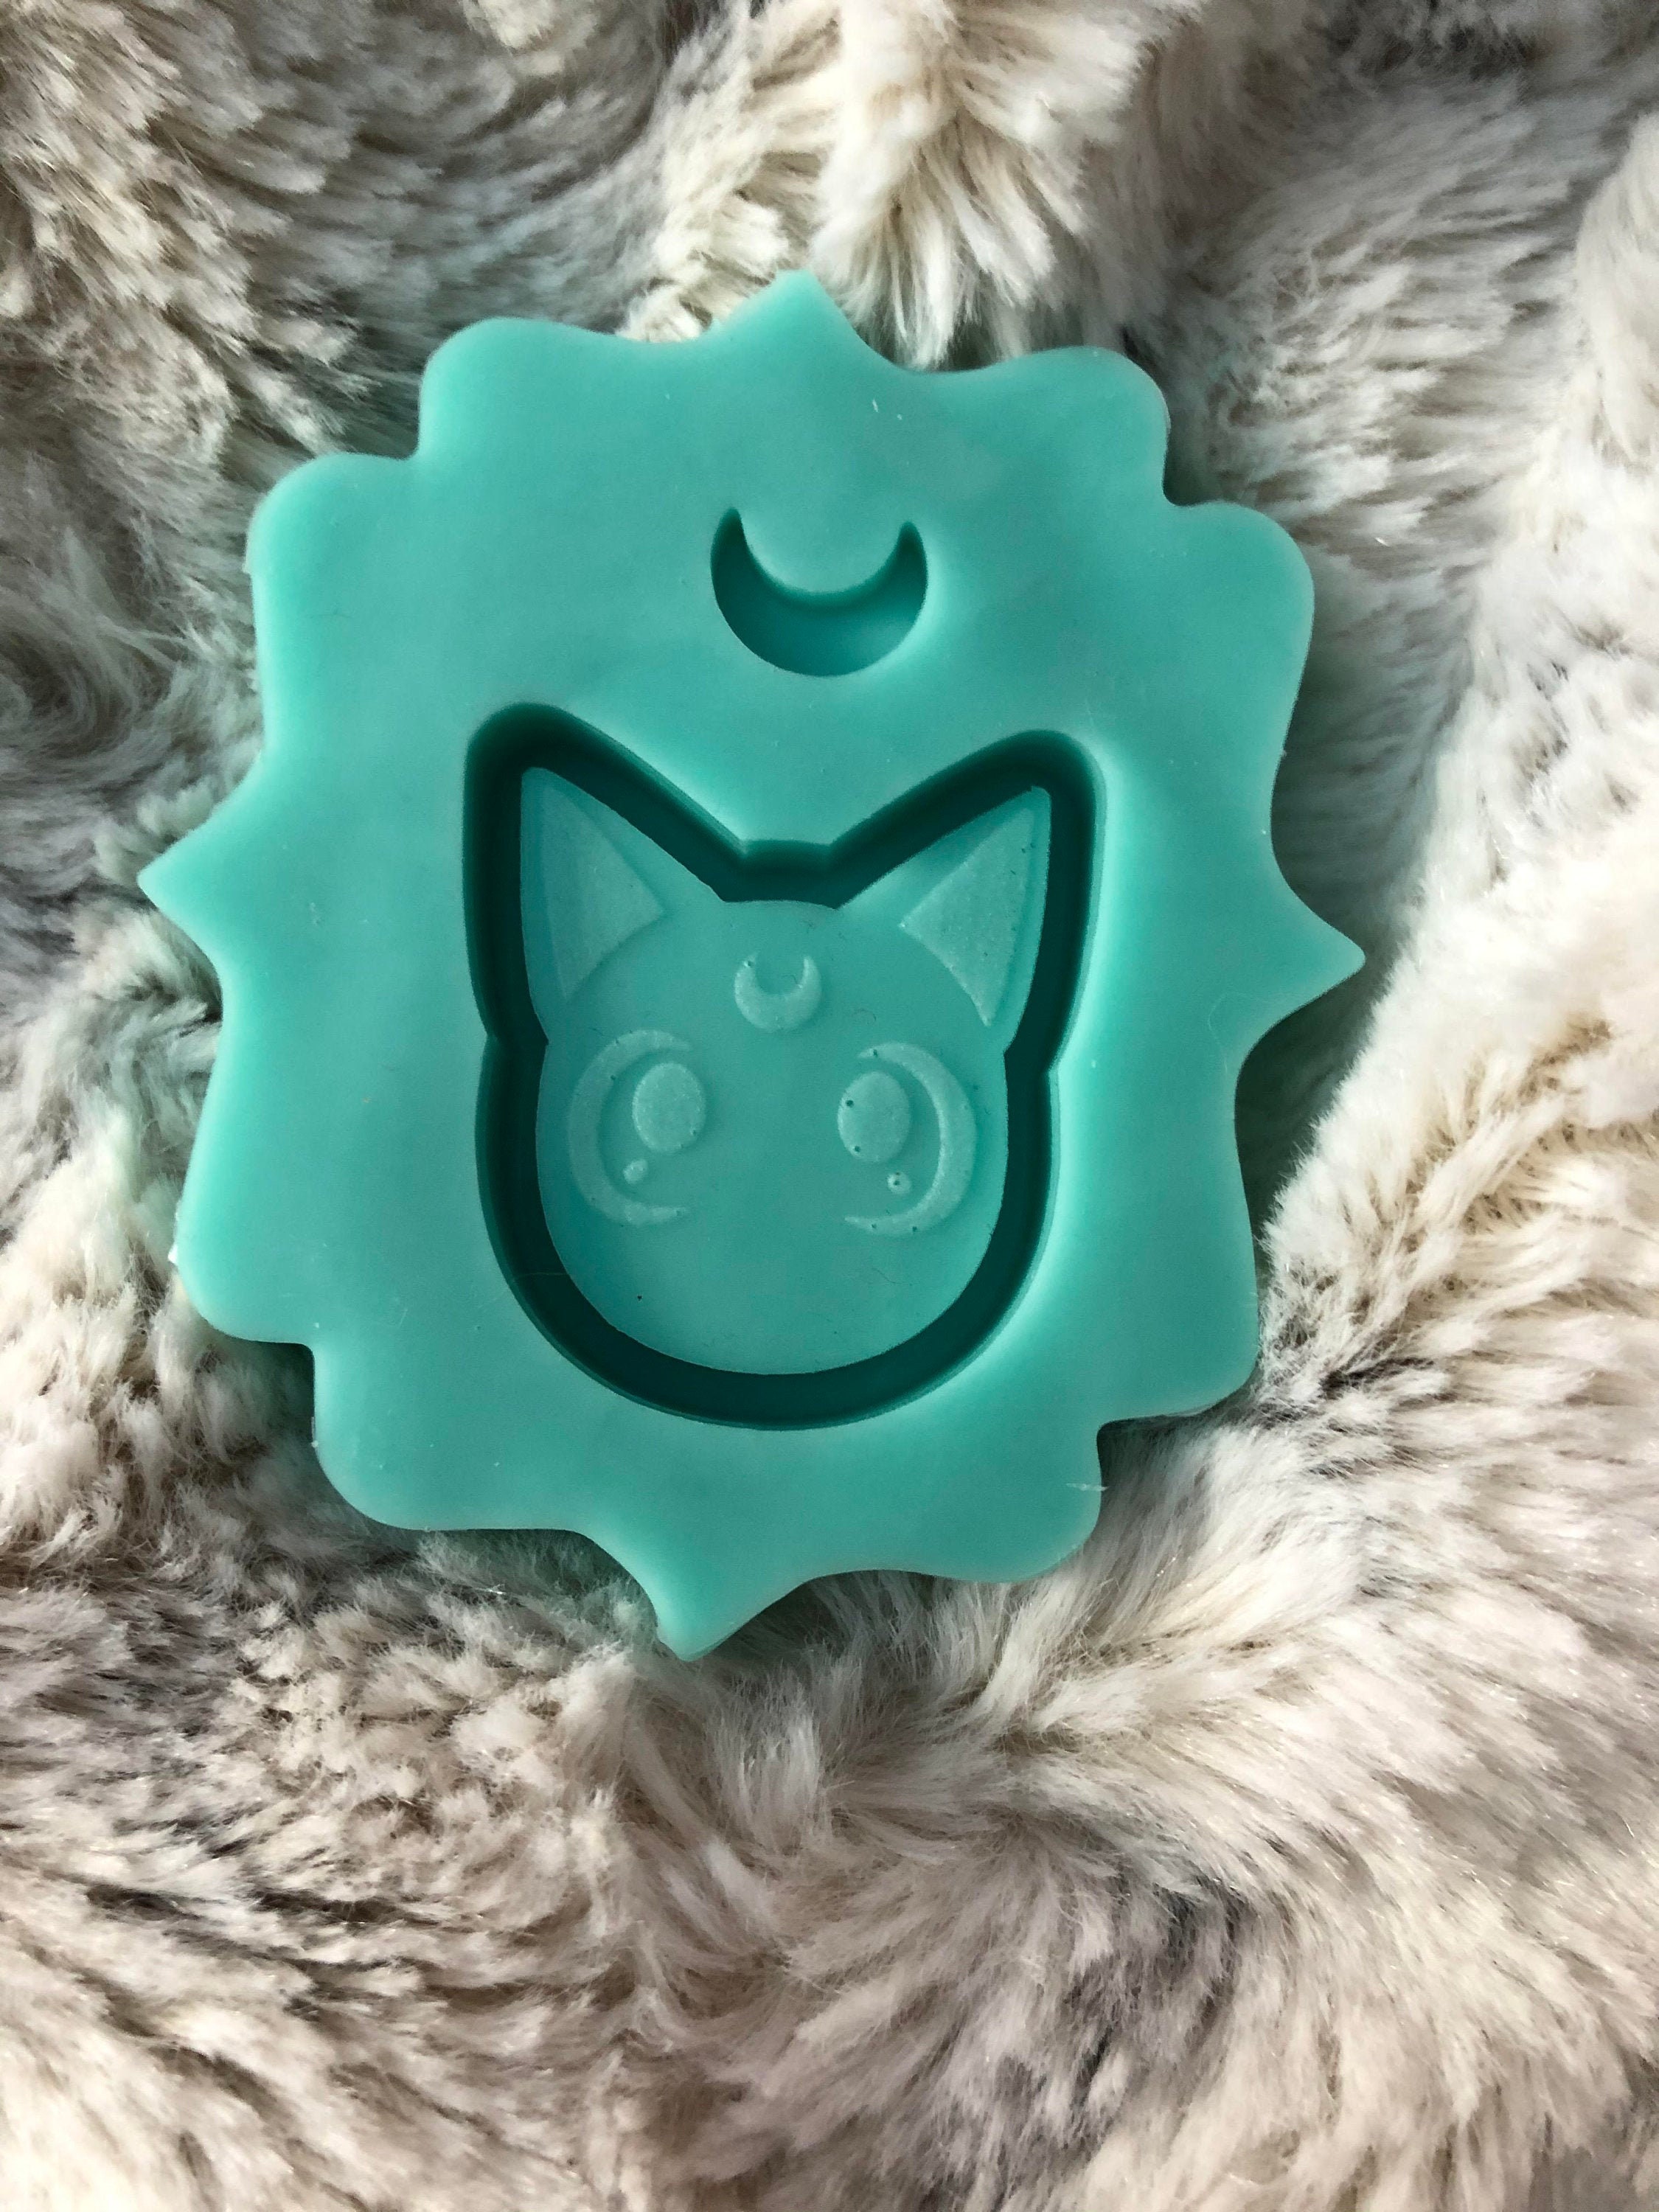 Phone Holder Silicone Mold, Shiny Mold, Silicone Molds for Epoxy Crafts,  Resin Craft Molds, Epoxy Resin Jewelry Making Supplies 